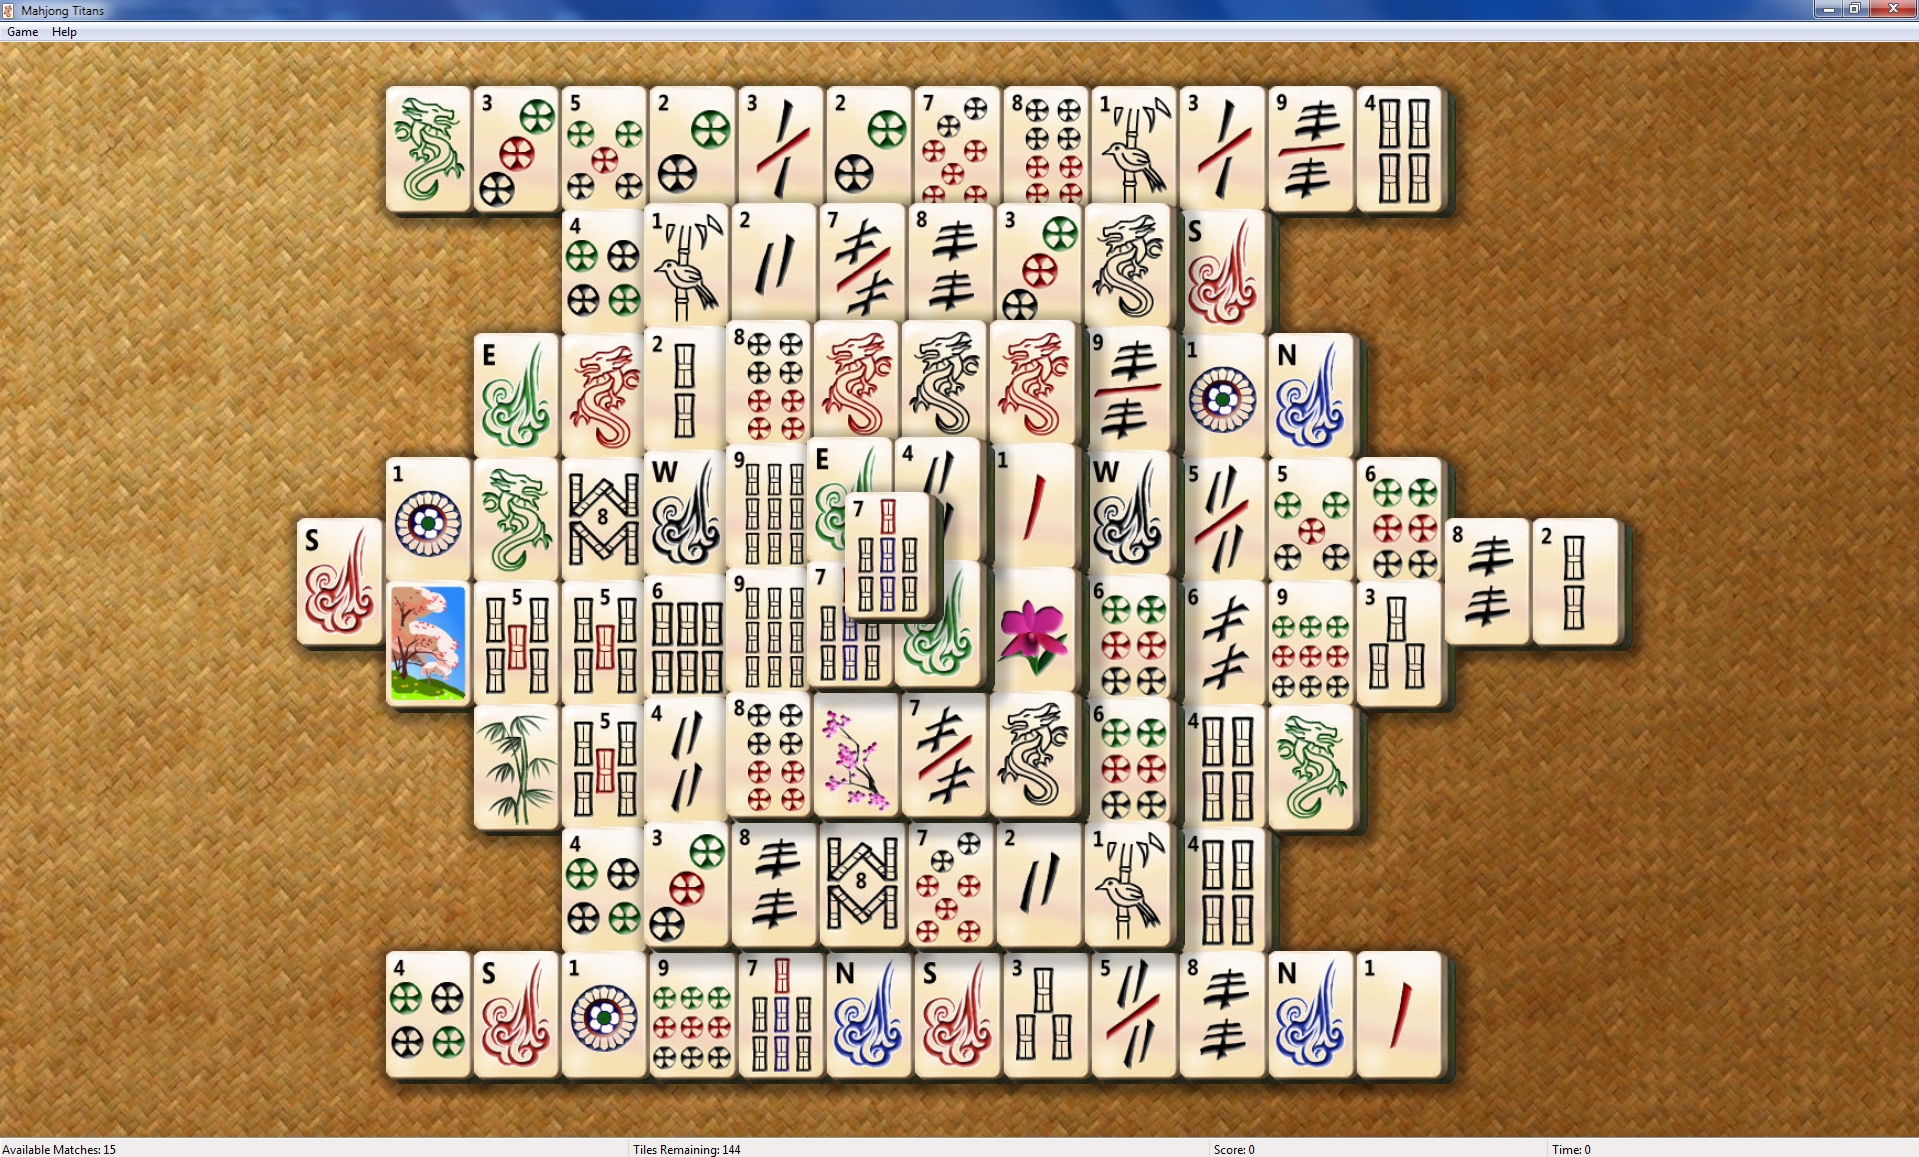 mahjong free download from microsoft for windows 7